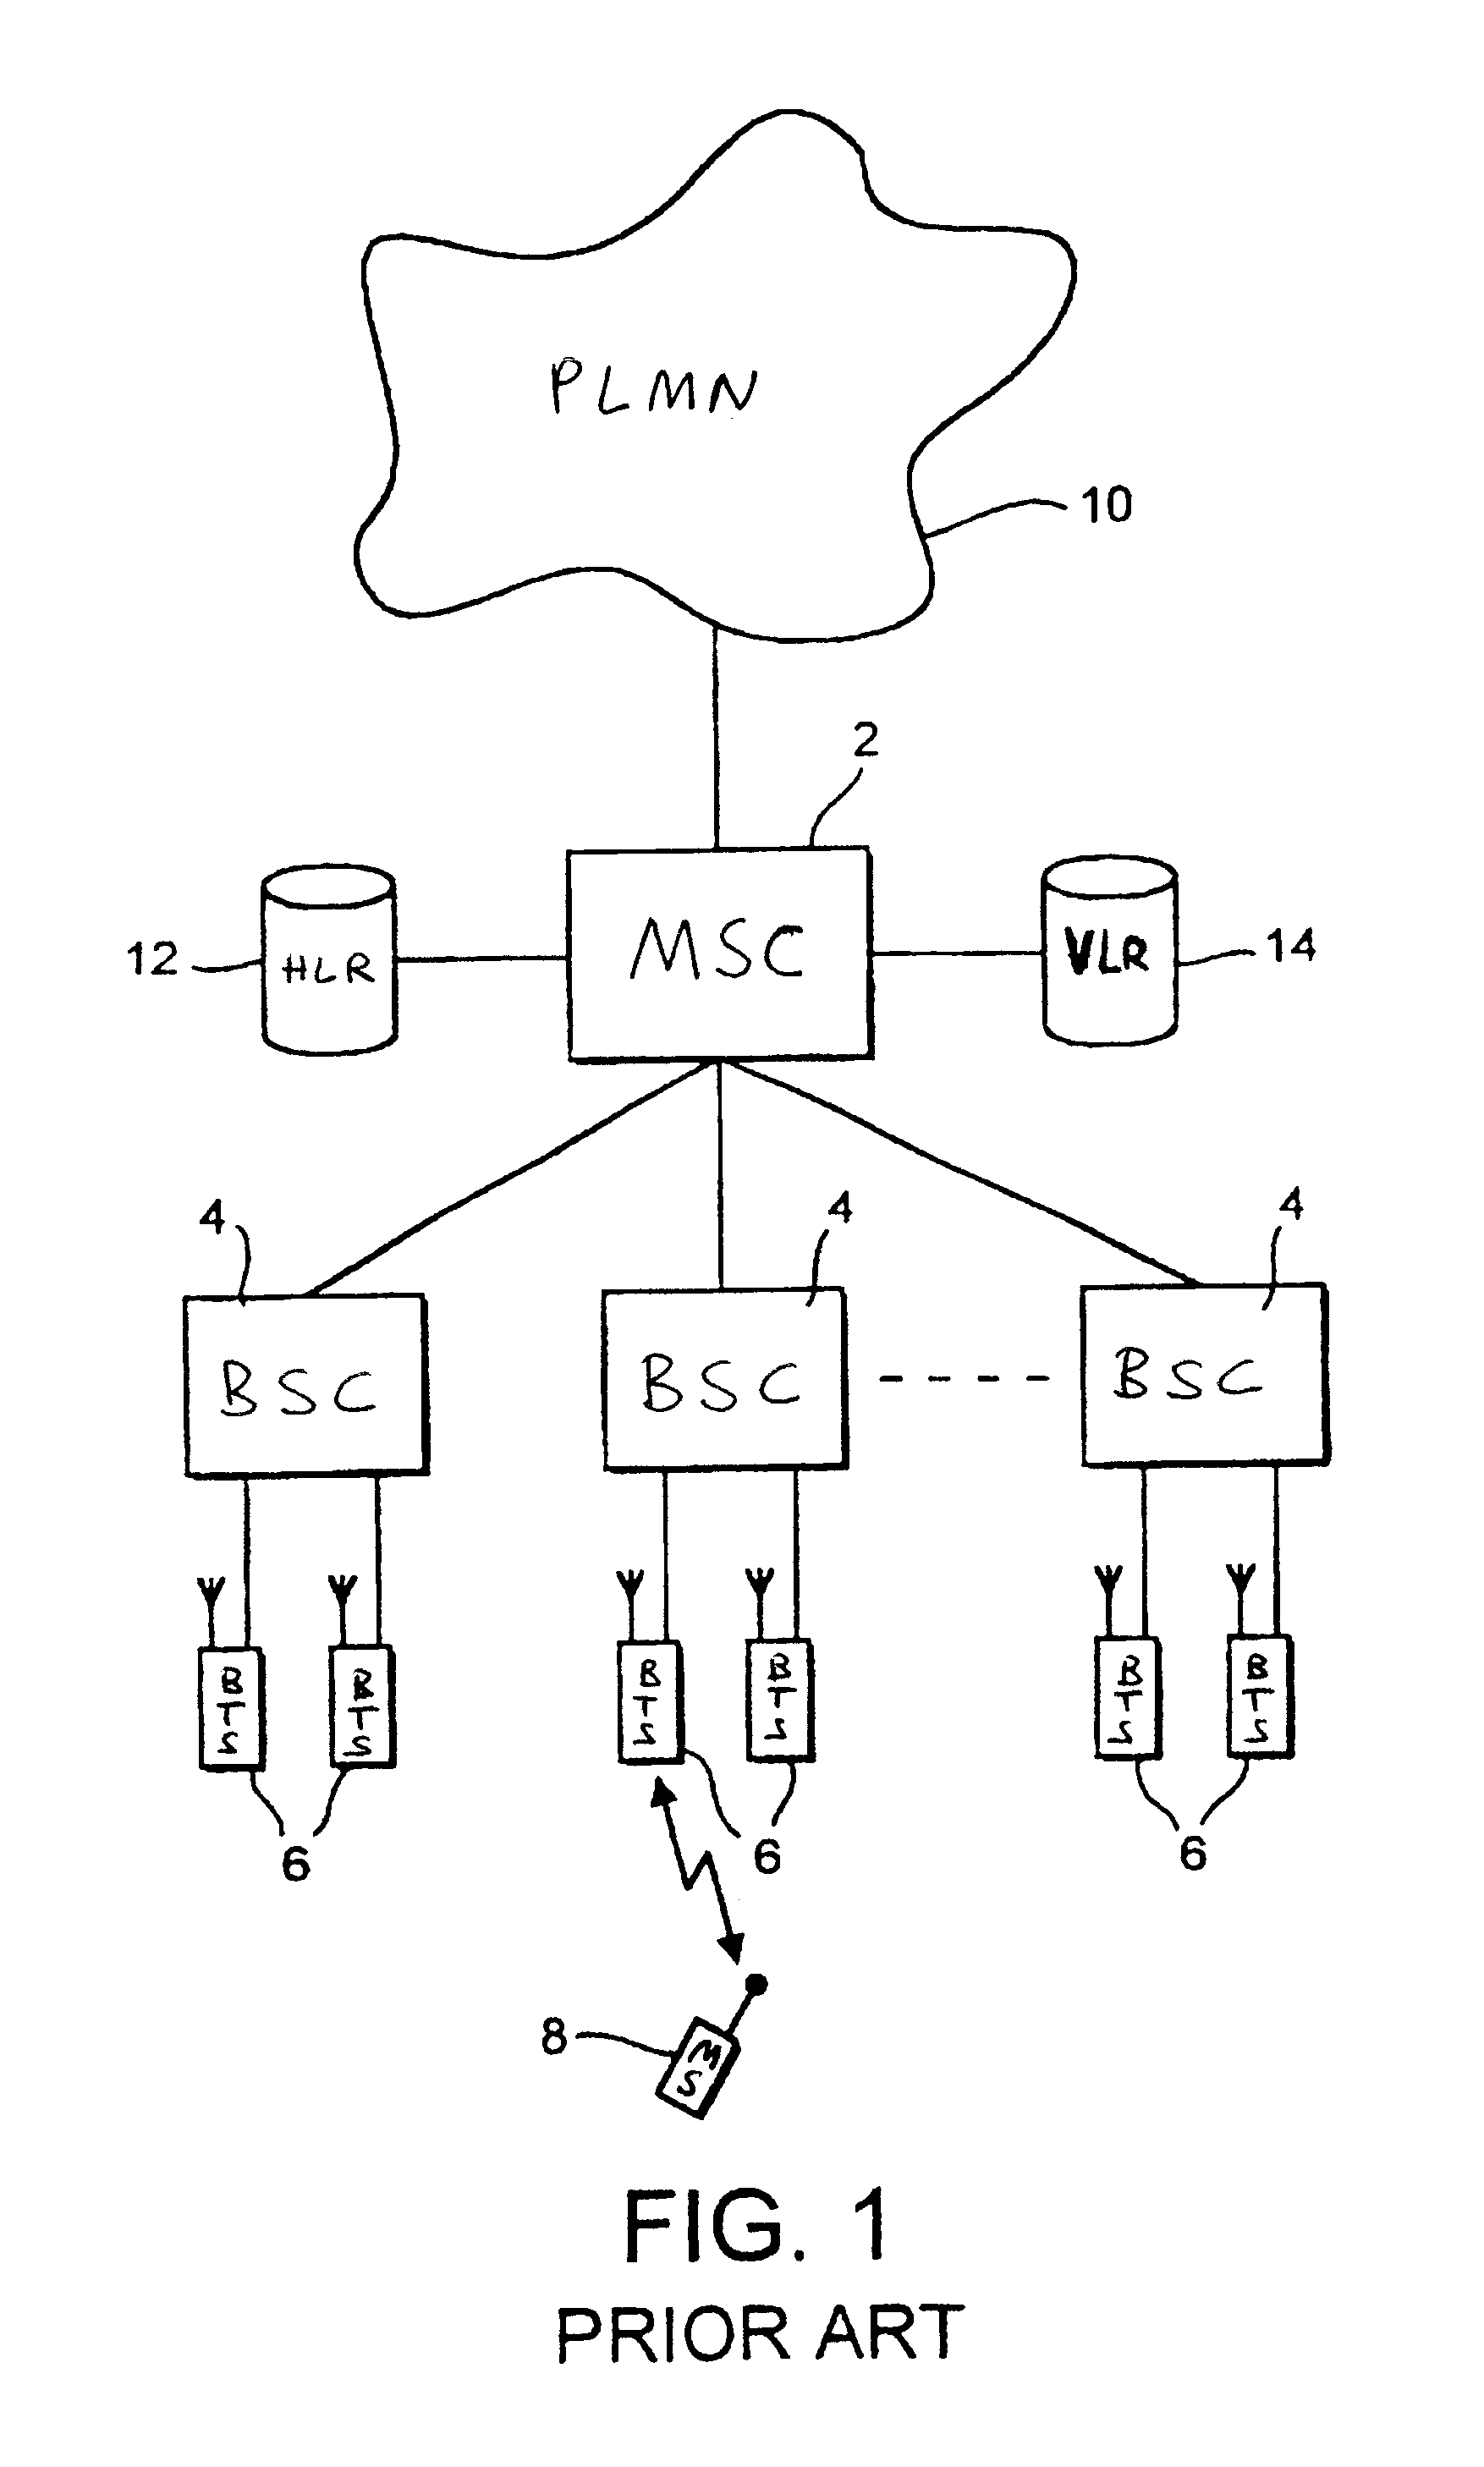 Mobile communications system having a cellular communications network comprising a public network portion and a private network portion using a common radio interface protocol